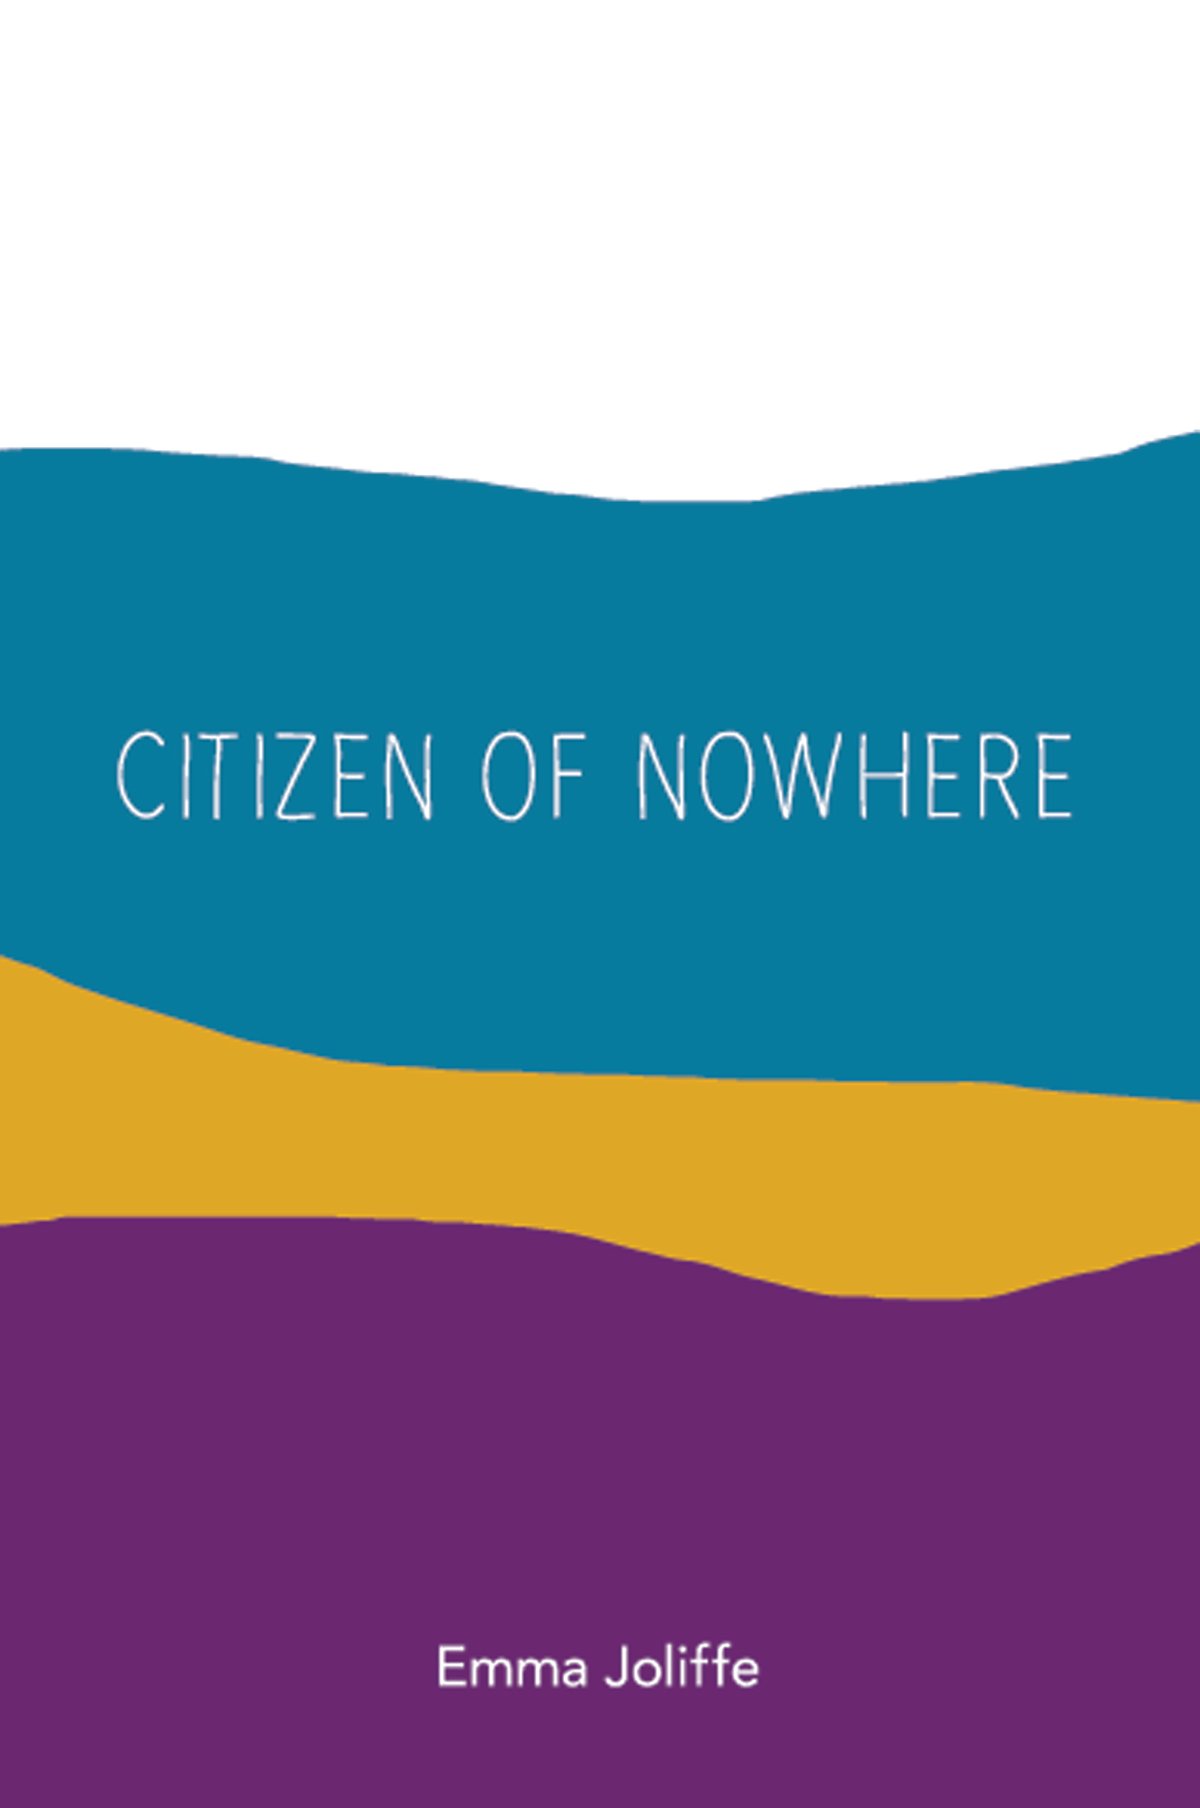 Image of Citizen of Nowhere by Emma Joliffe